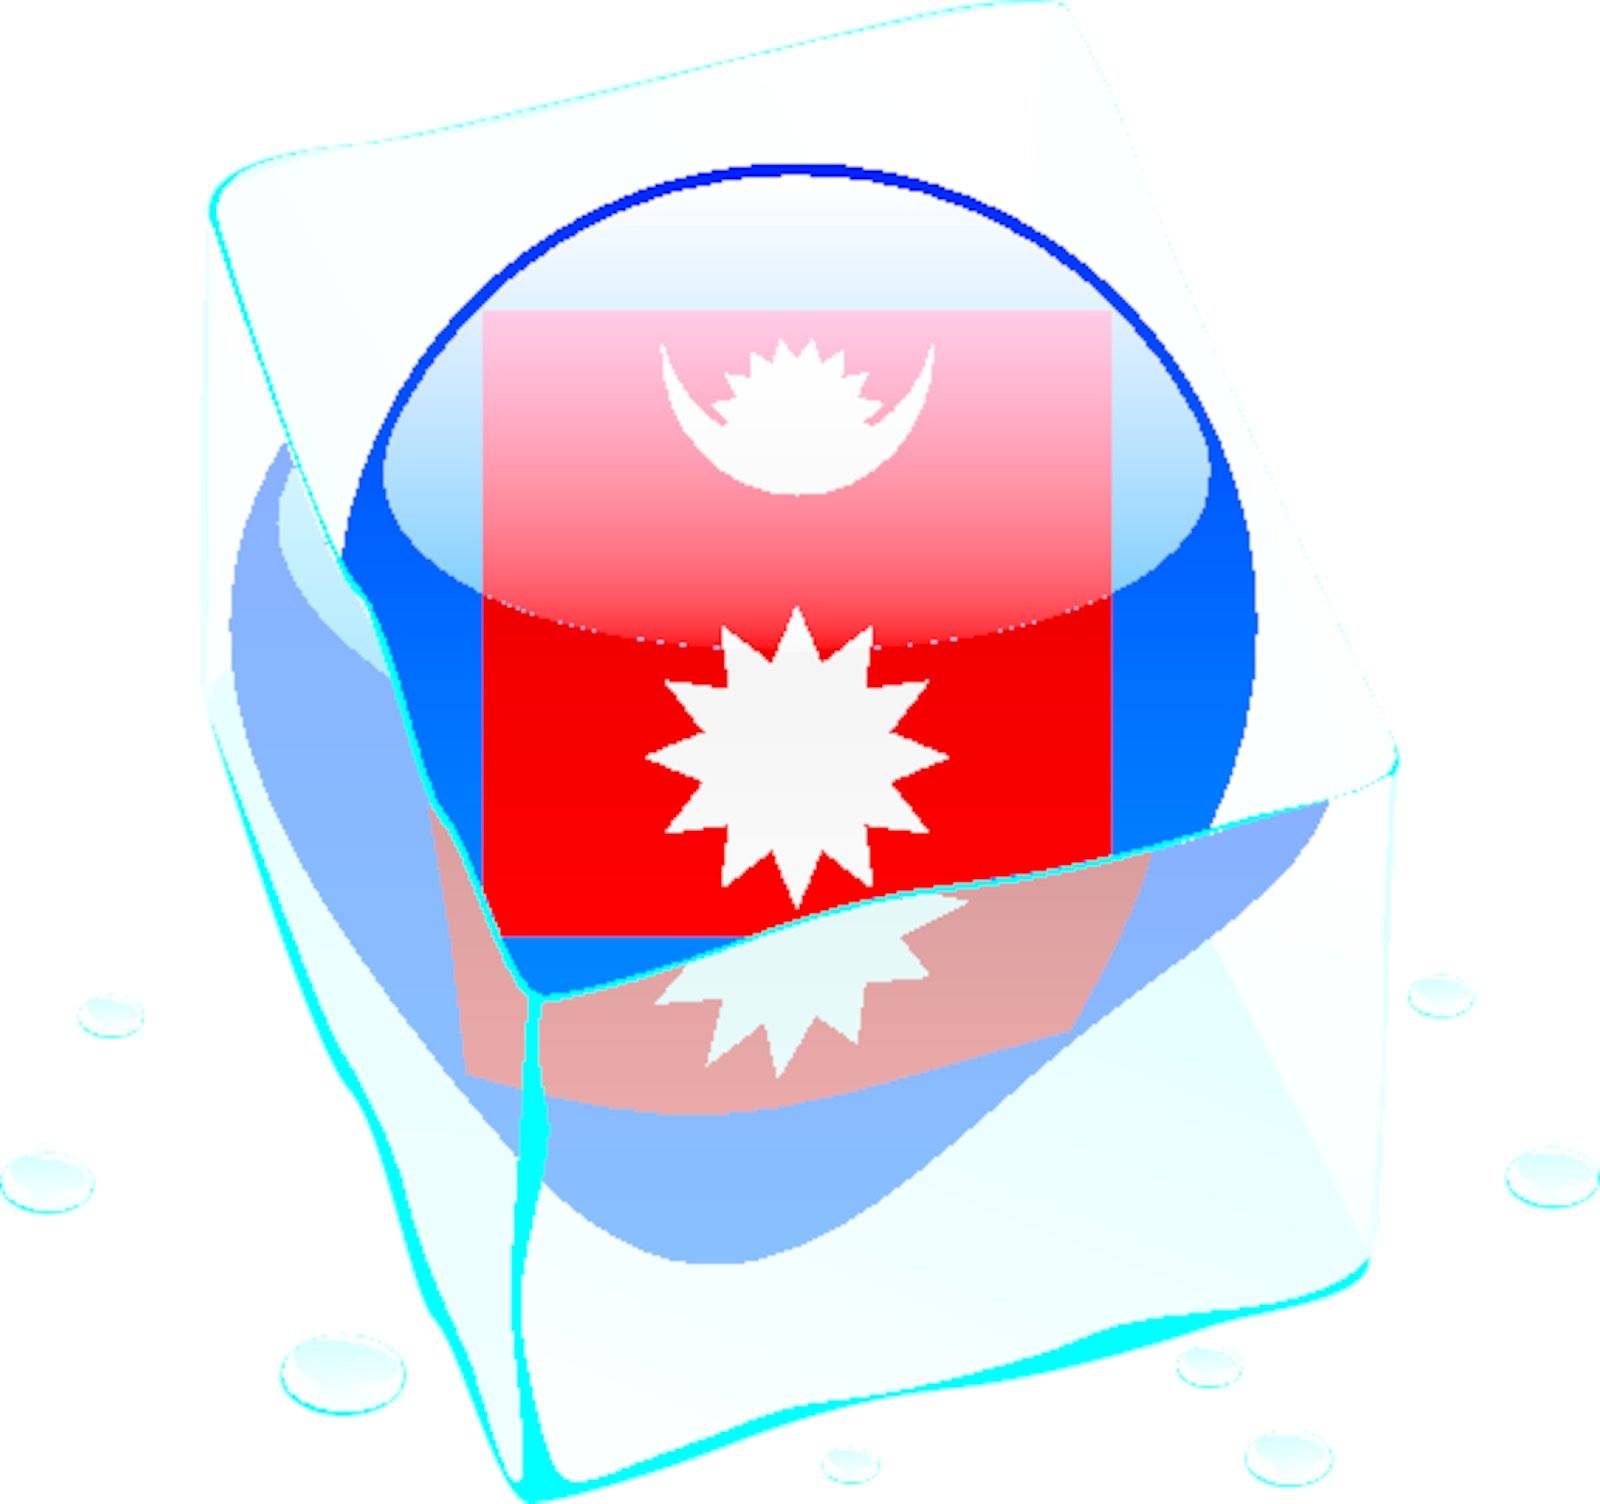 nepal button flag frozen in ice cube by pilgrimartworks